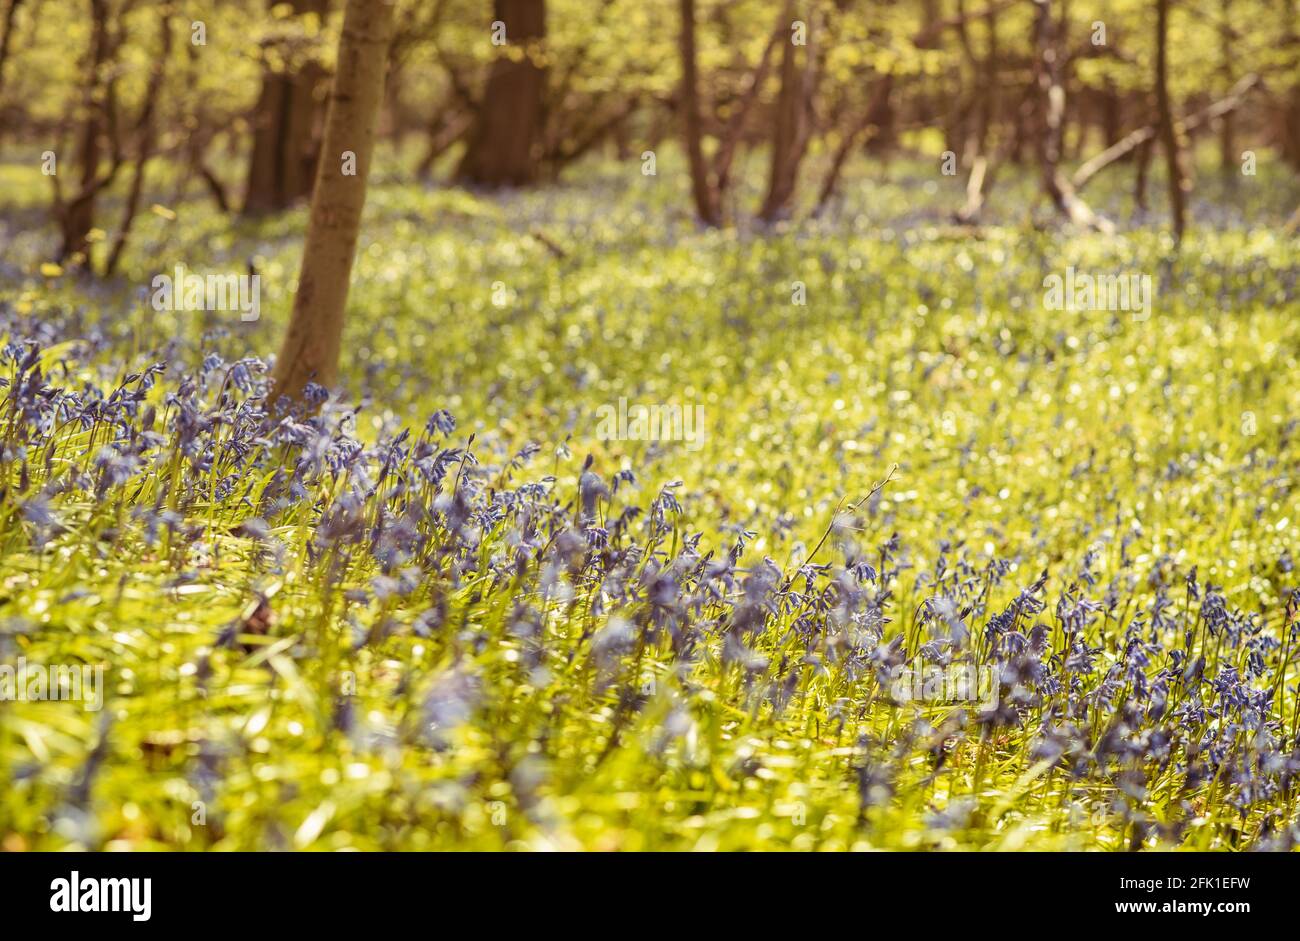 English landscape with forecast in spring and bluebells flowers, Chiltern Hills, Buckinghamshire, UK Stock Photo